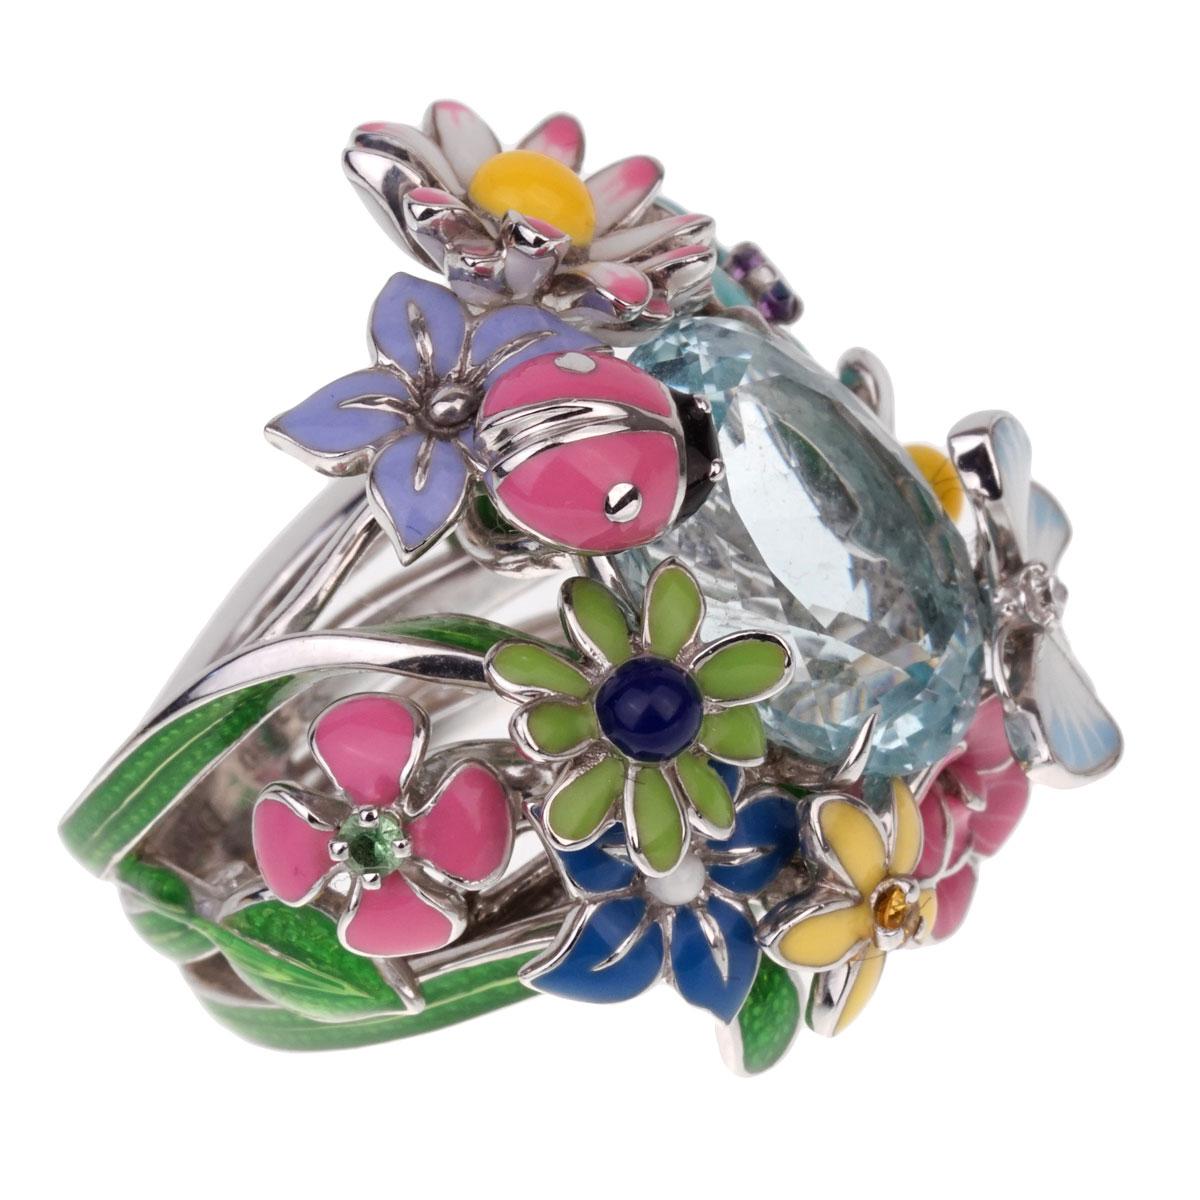 A magnificent Dior ring from the Diorette collection - an ode to the flowers and fantasies of the Christian Dior garden. Crafted in 18k white gold, the ring showcases a large Aquamarine surrounded by Amethyst, Pink sapphire, Yellow sapphire, and